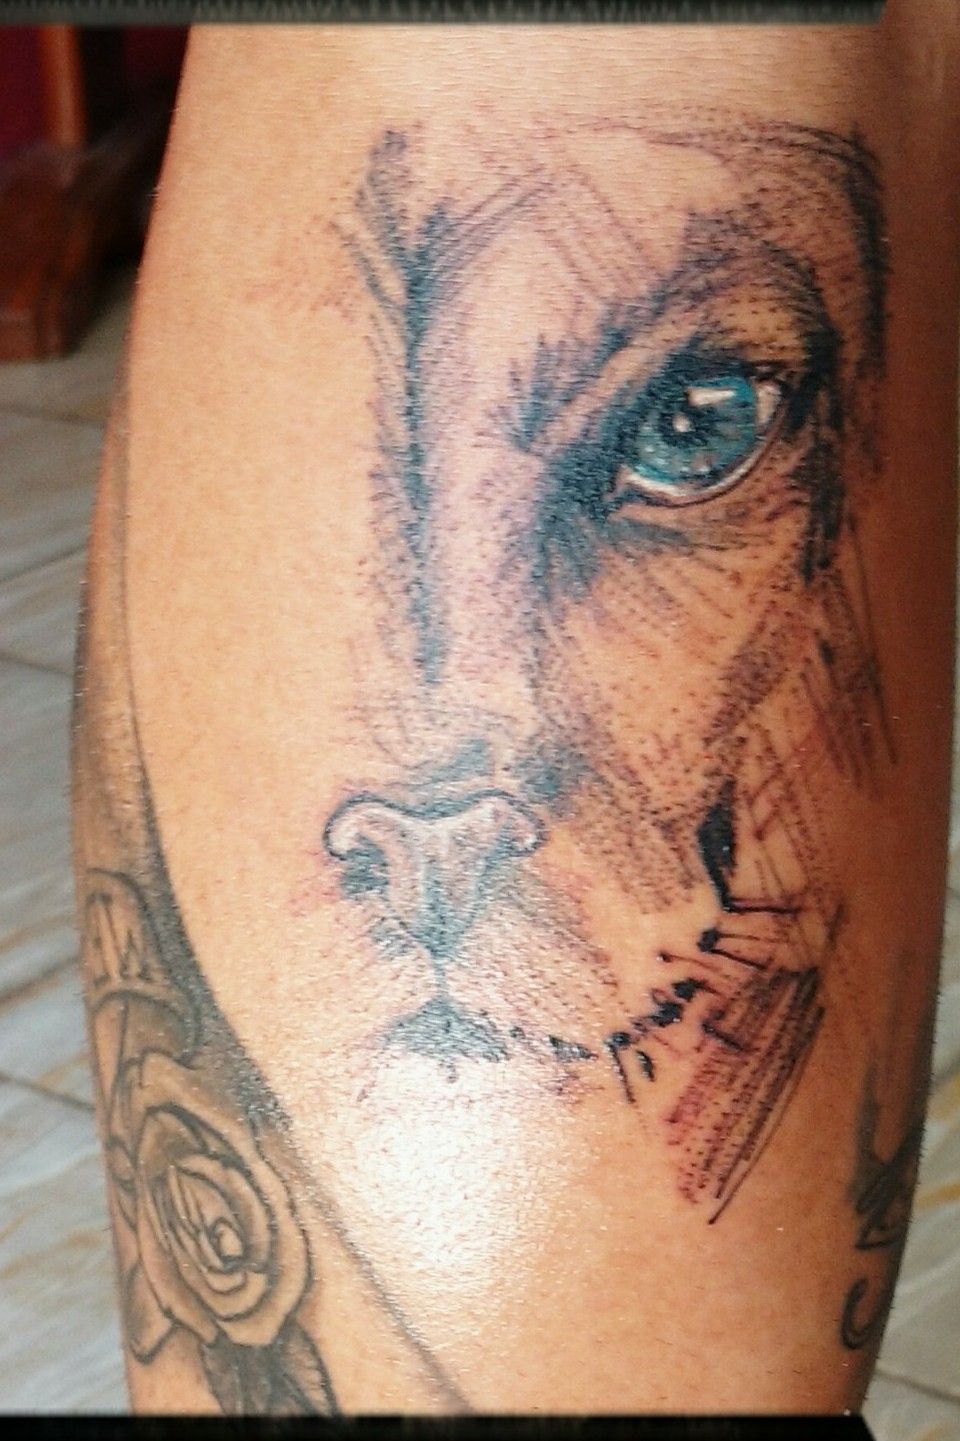 cougar' in Tattoos • Search in +1.3M Tattoos Now • Tattoodo